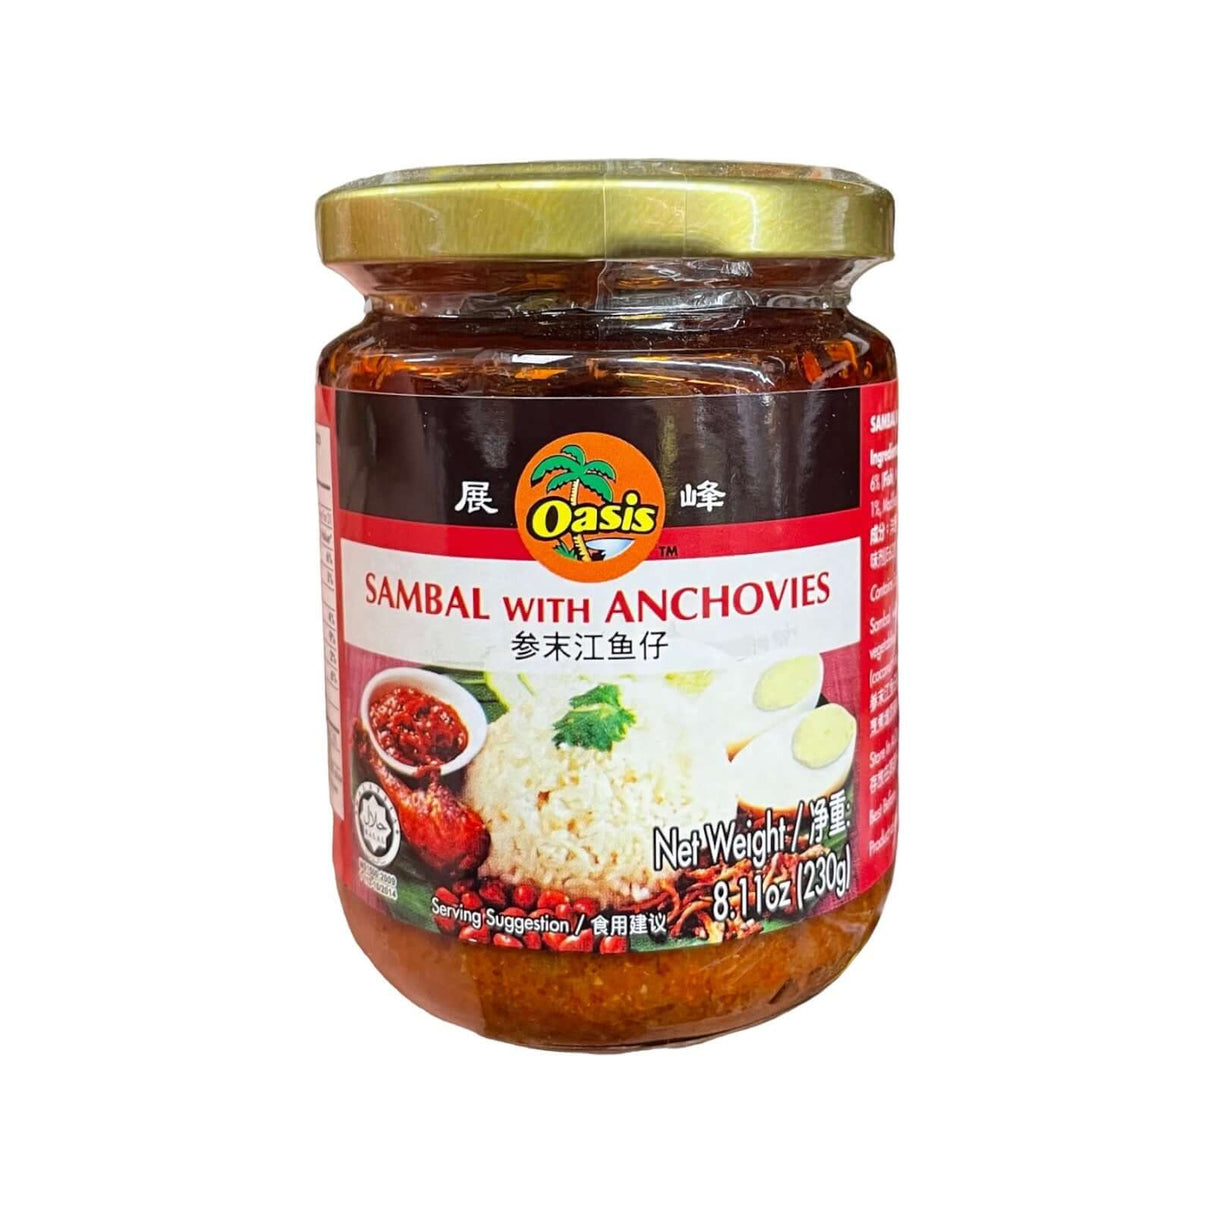 Oasis Sambal with Anchovies